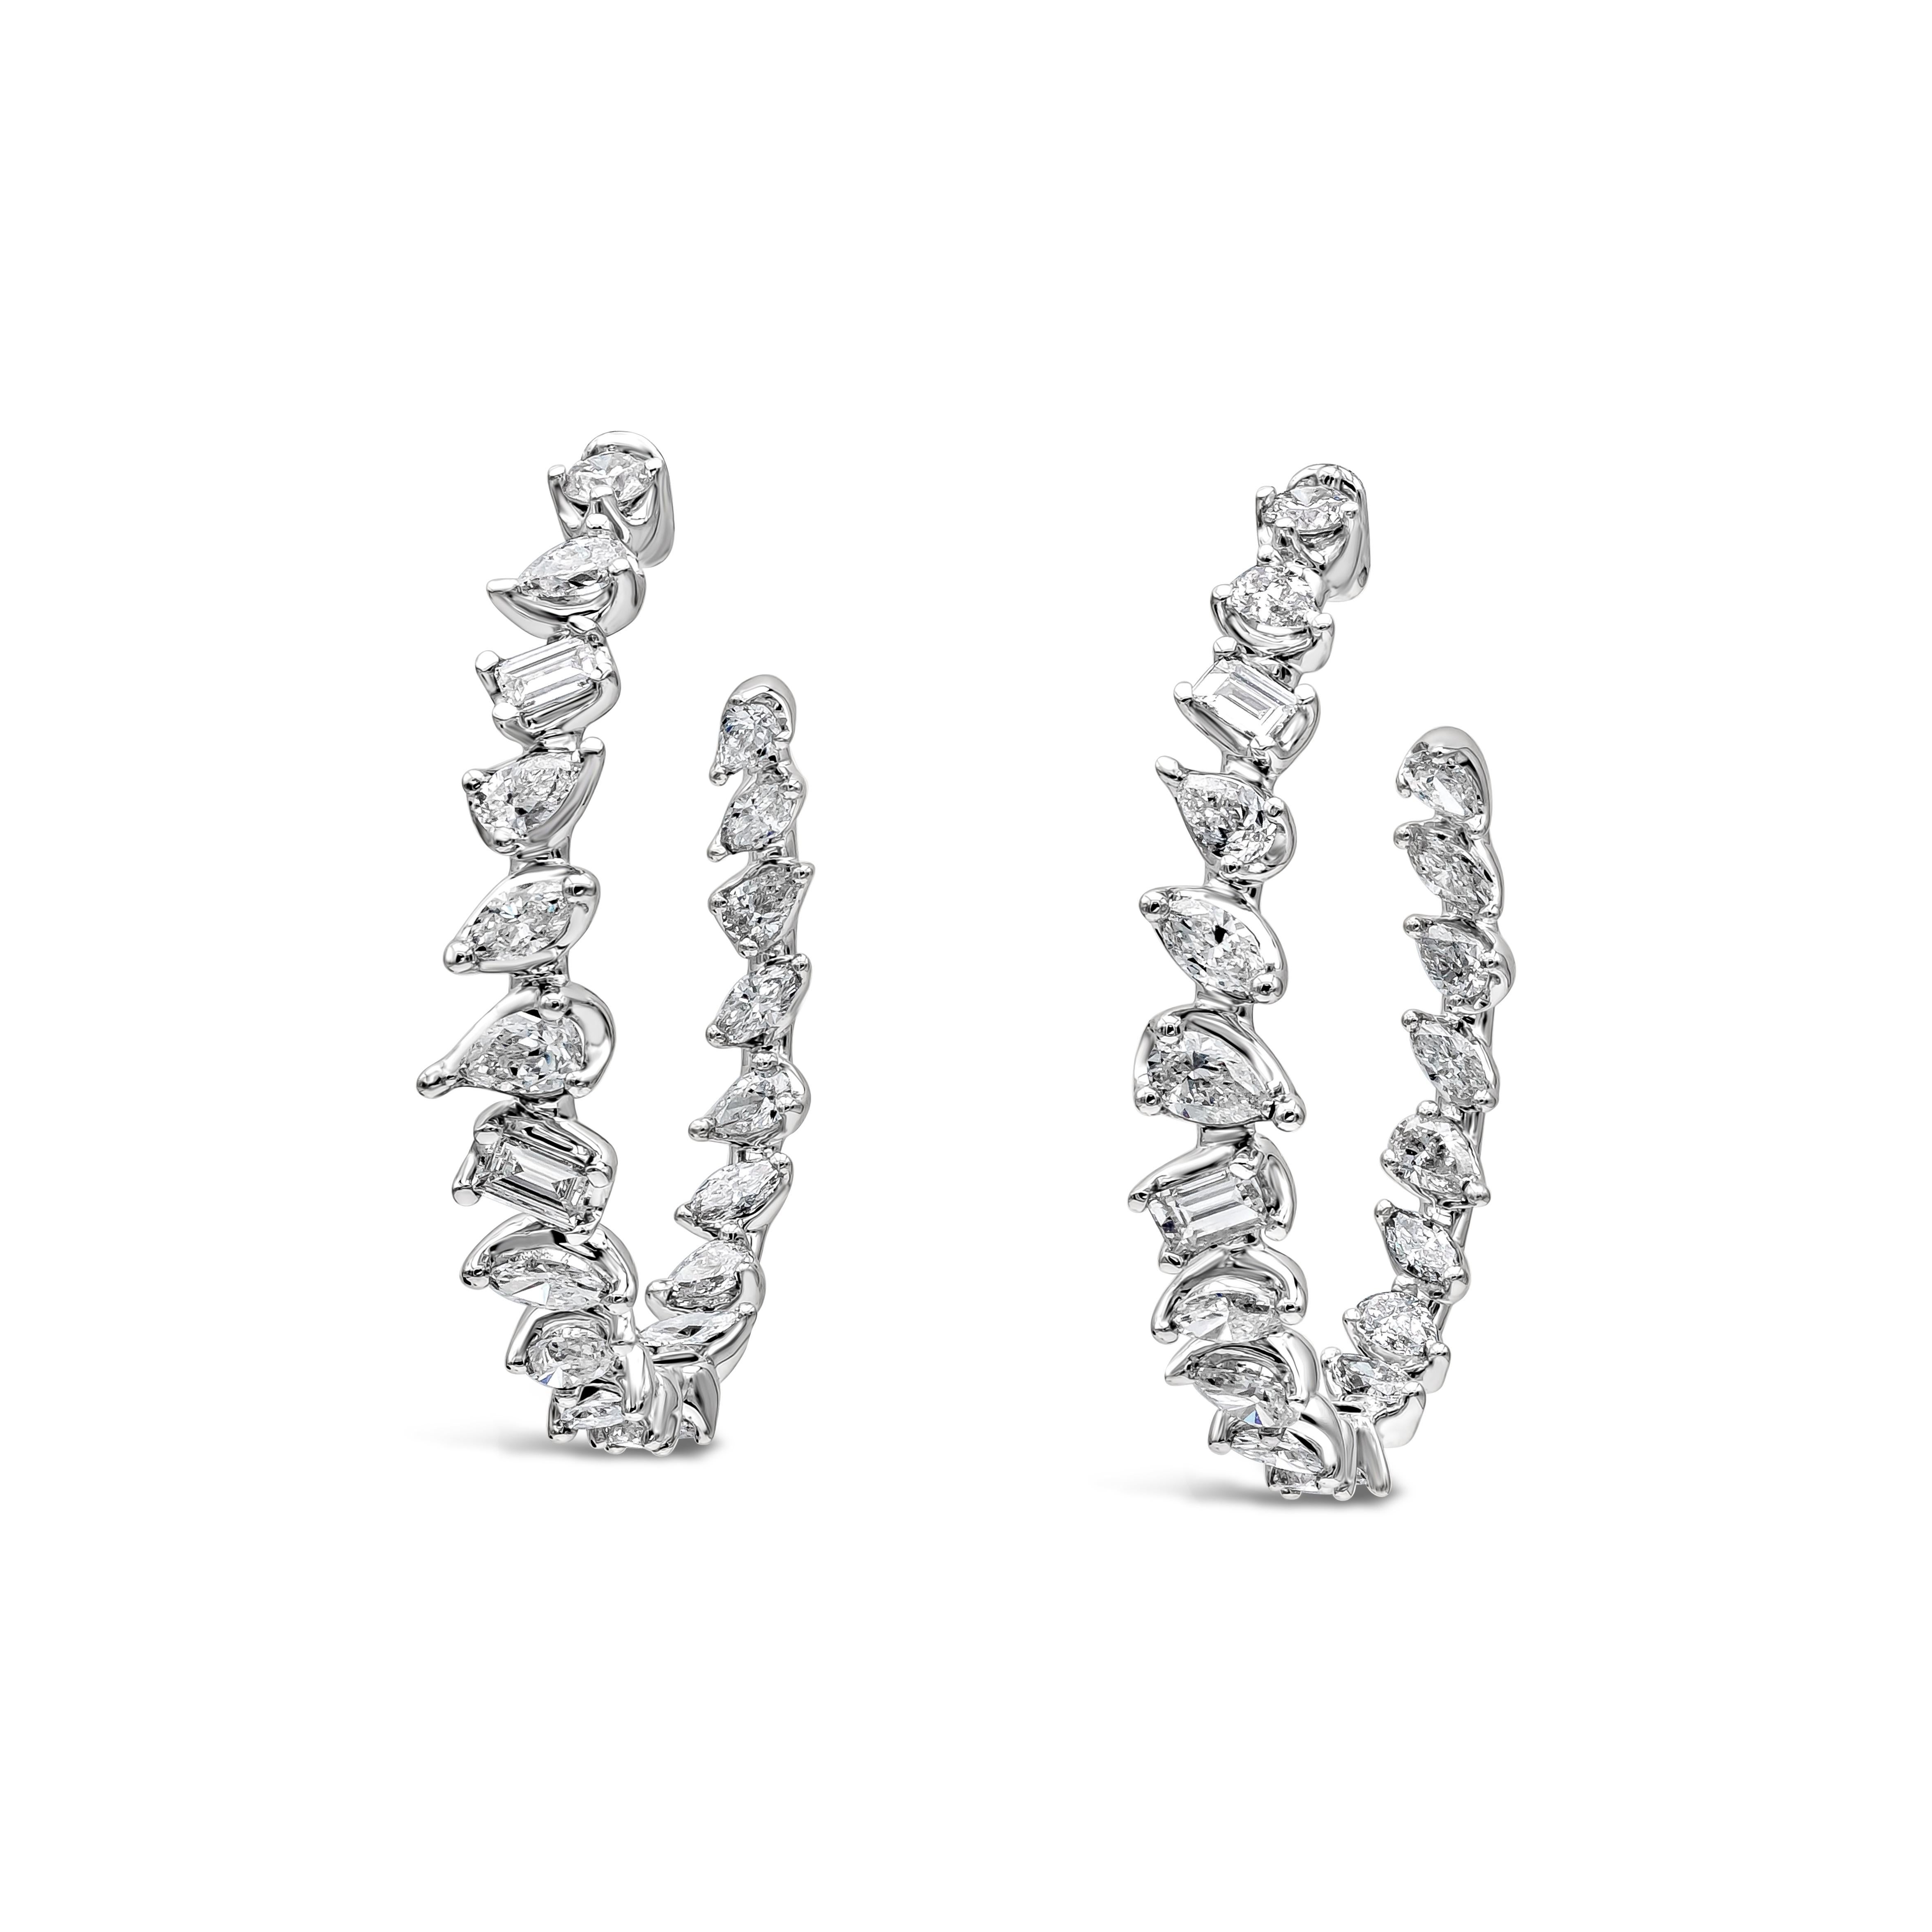 A simple and versatile hoop earrings showcasing multiple shape diamonds weighing 2.68 carats total in G-H color and SI in clarity. Made in 18 karat white gold.

Roman Malakov is a custom house, specializing in creating anything you can imagine. If